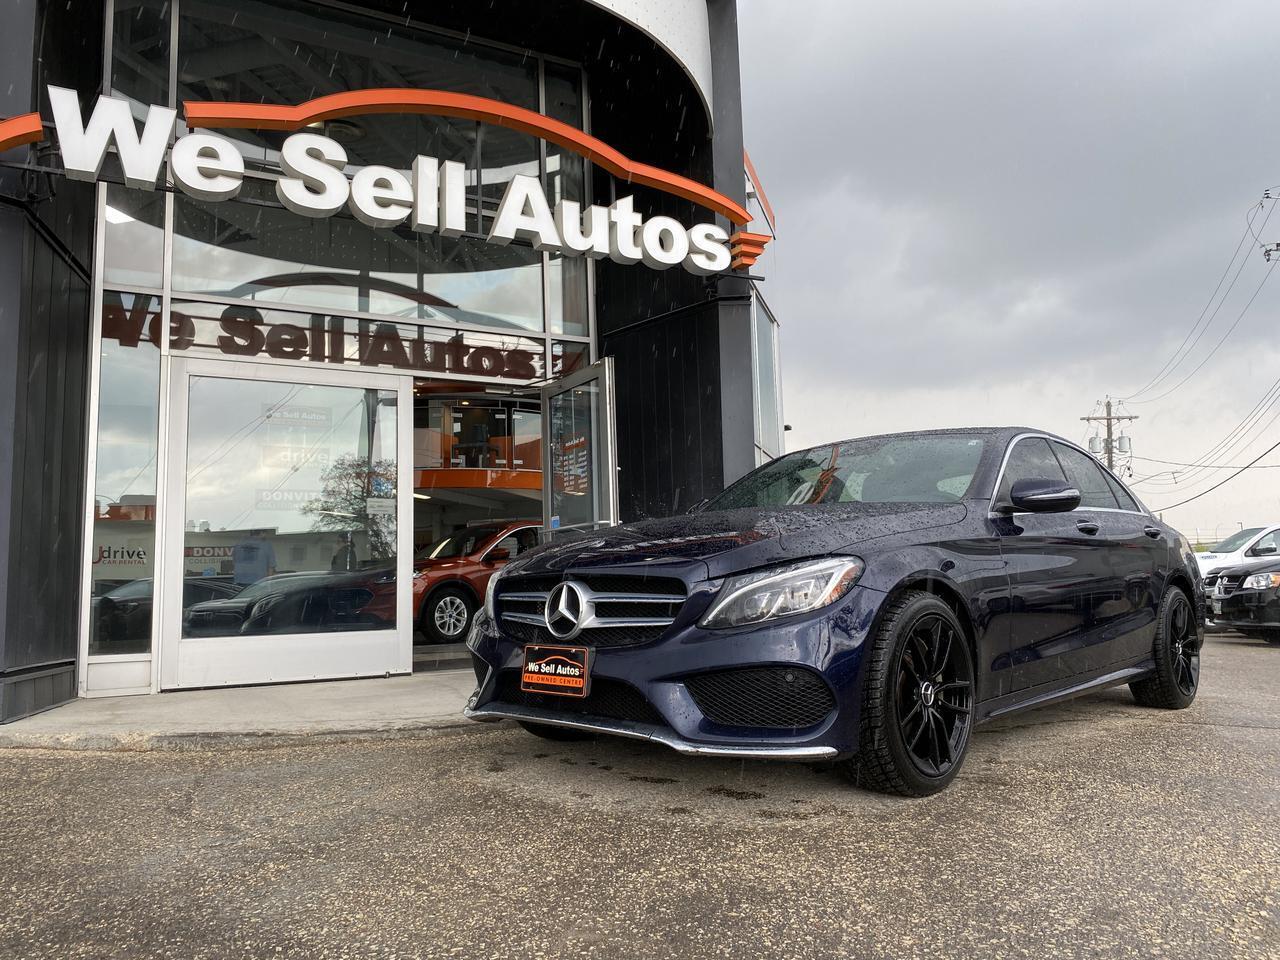 2018 Mercedes-Benz C-Class C 300 w/Panorama Sunroof, Navigation, LOADED!